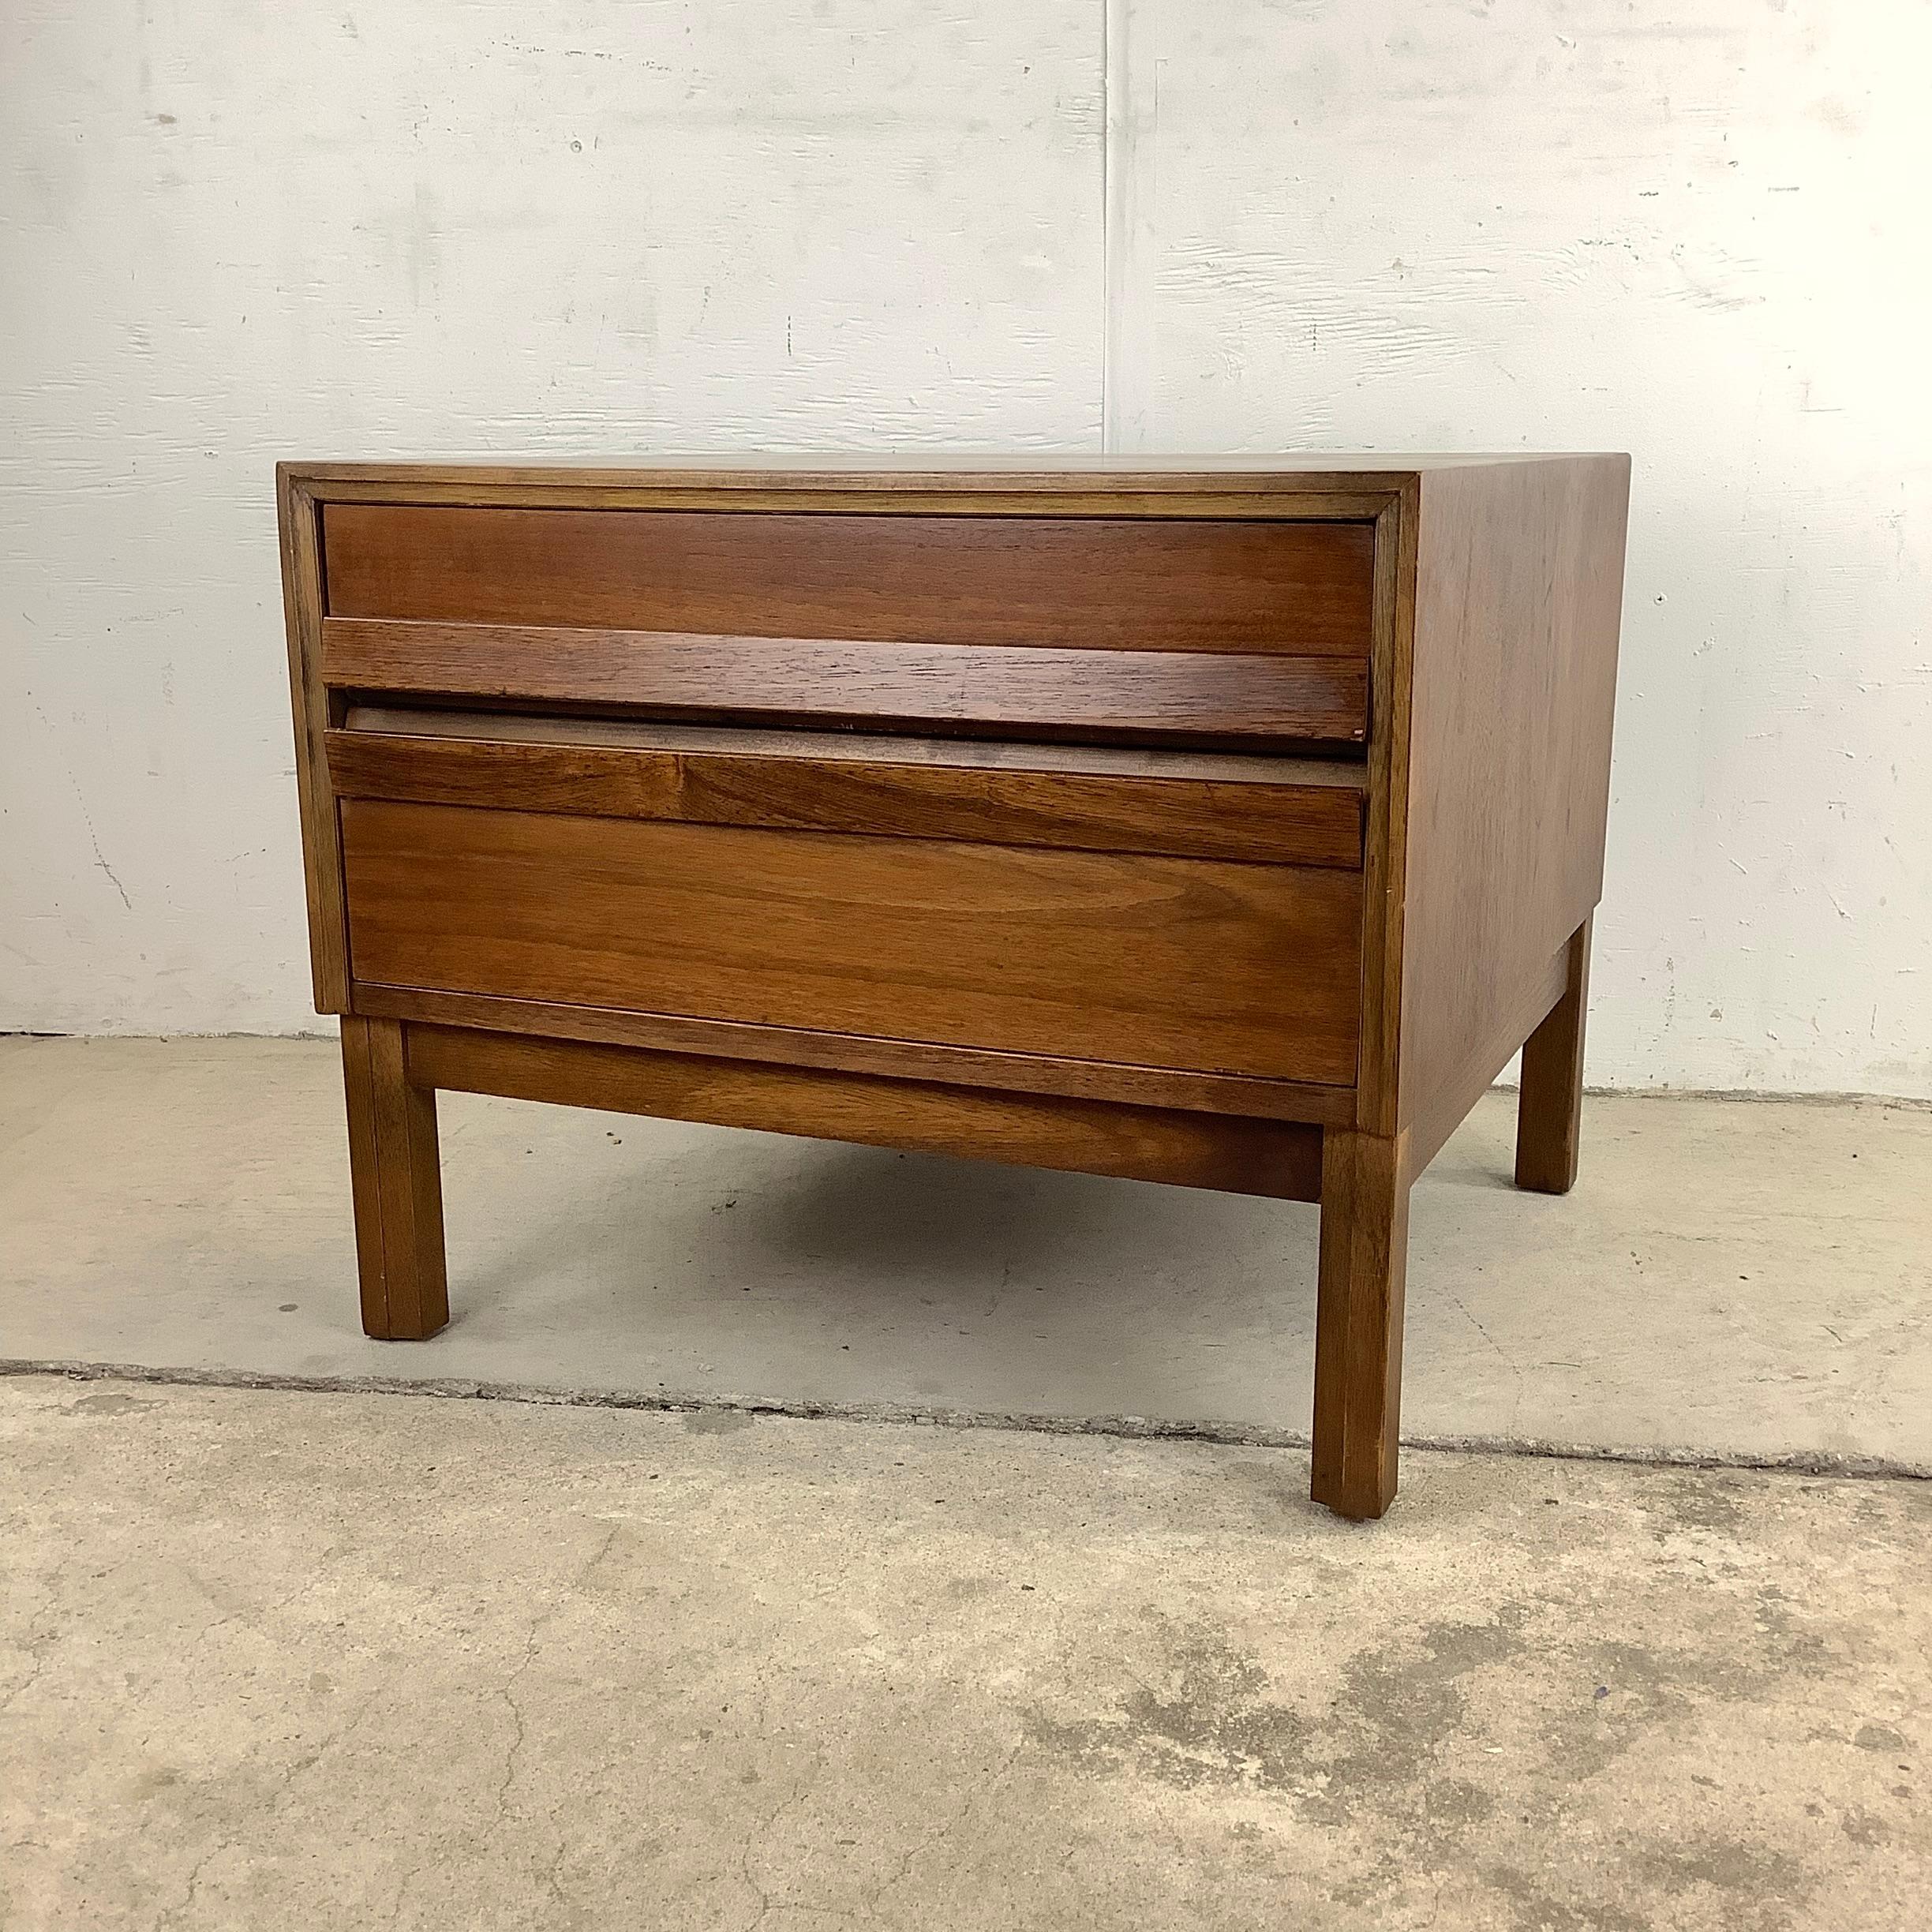 This simple yet stylish Mid-Century Modern Walnut End Table perfectly captures the best aspects of classic mid-century style. Crafted from high-quality vintage walnut, these end tables showcase the natural beauty of the wood grain, exuding warmth